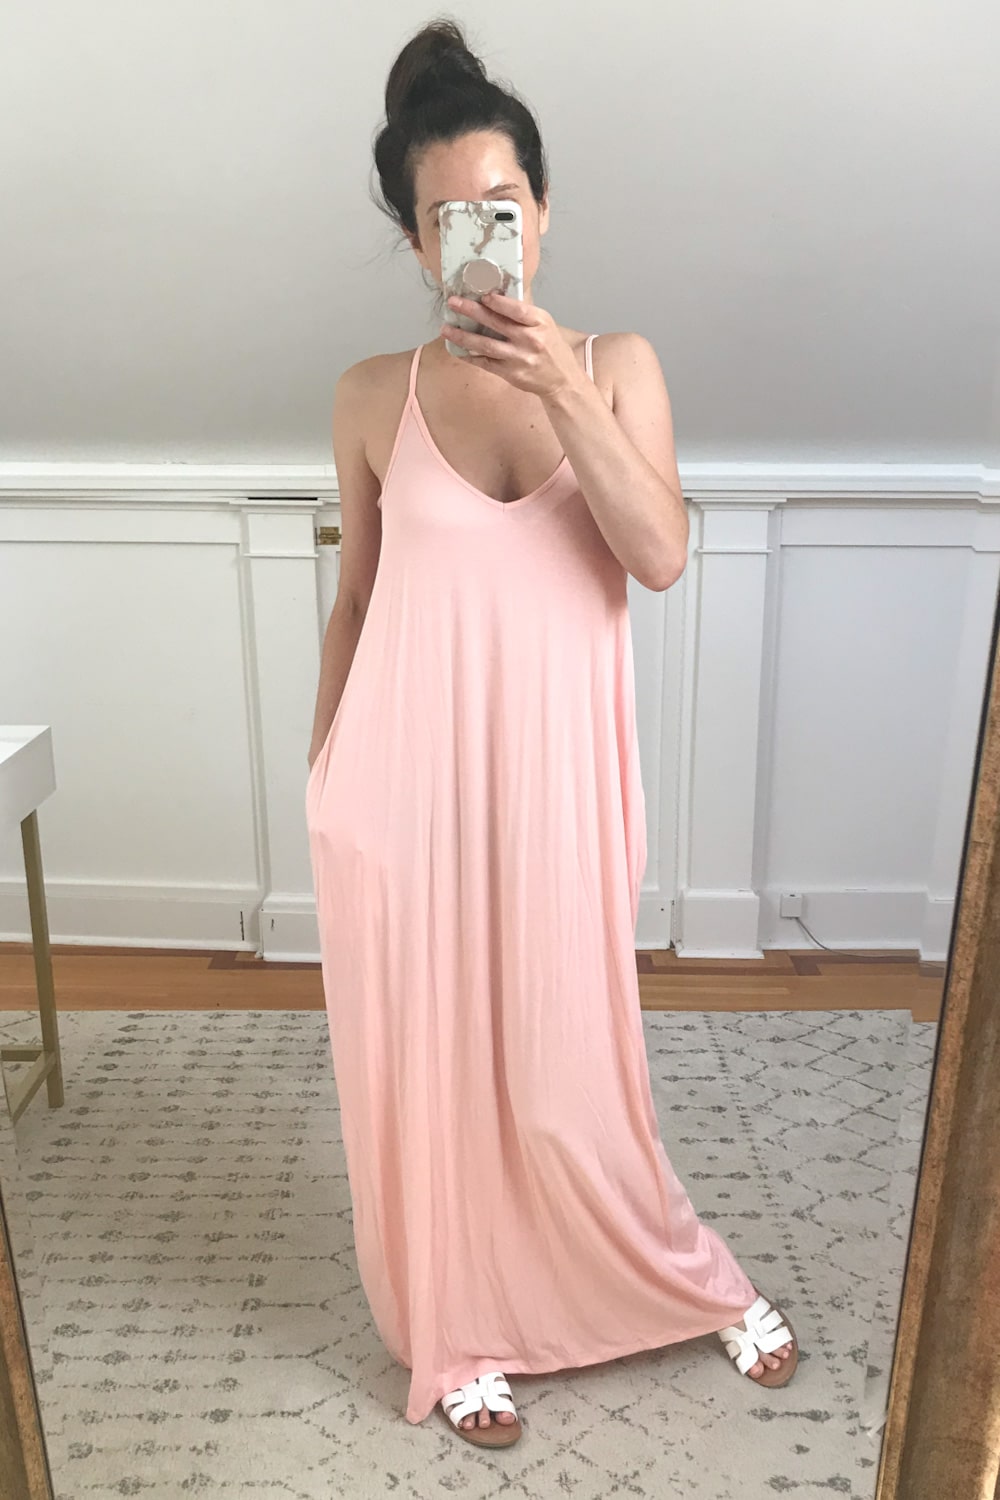 Amazon pink spaghetti strap maxi dress tried on by affordable fashion blogger Stephanie Ziajka on Diary of a Debutante